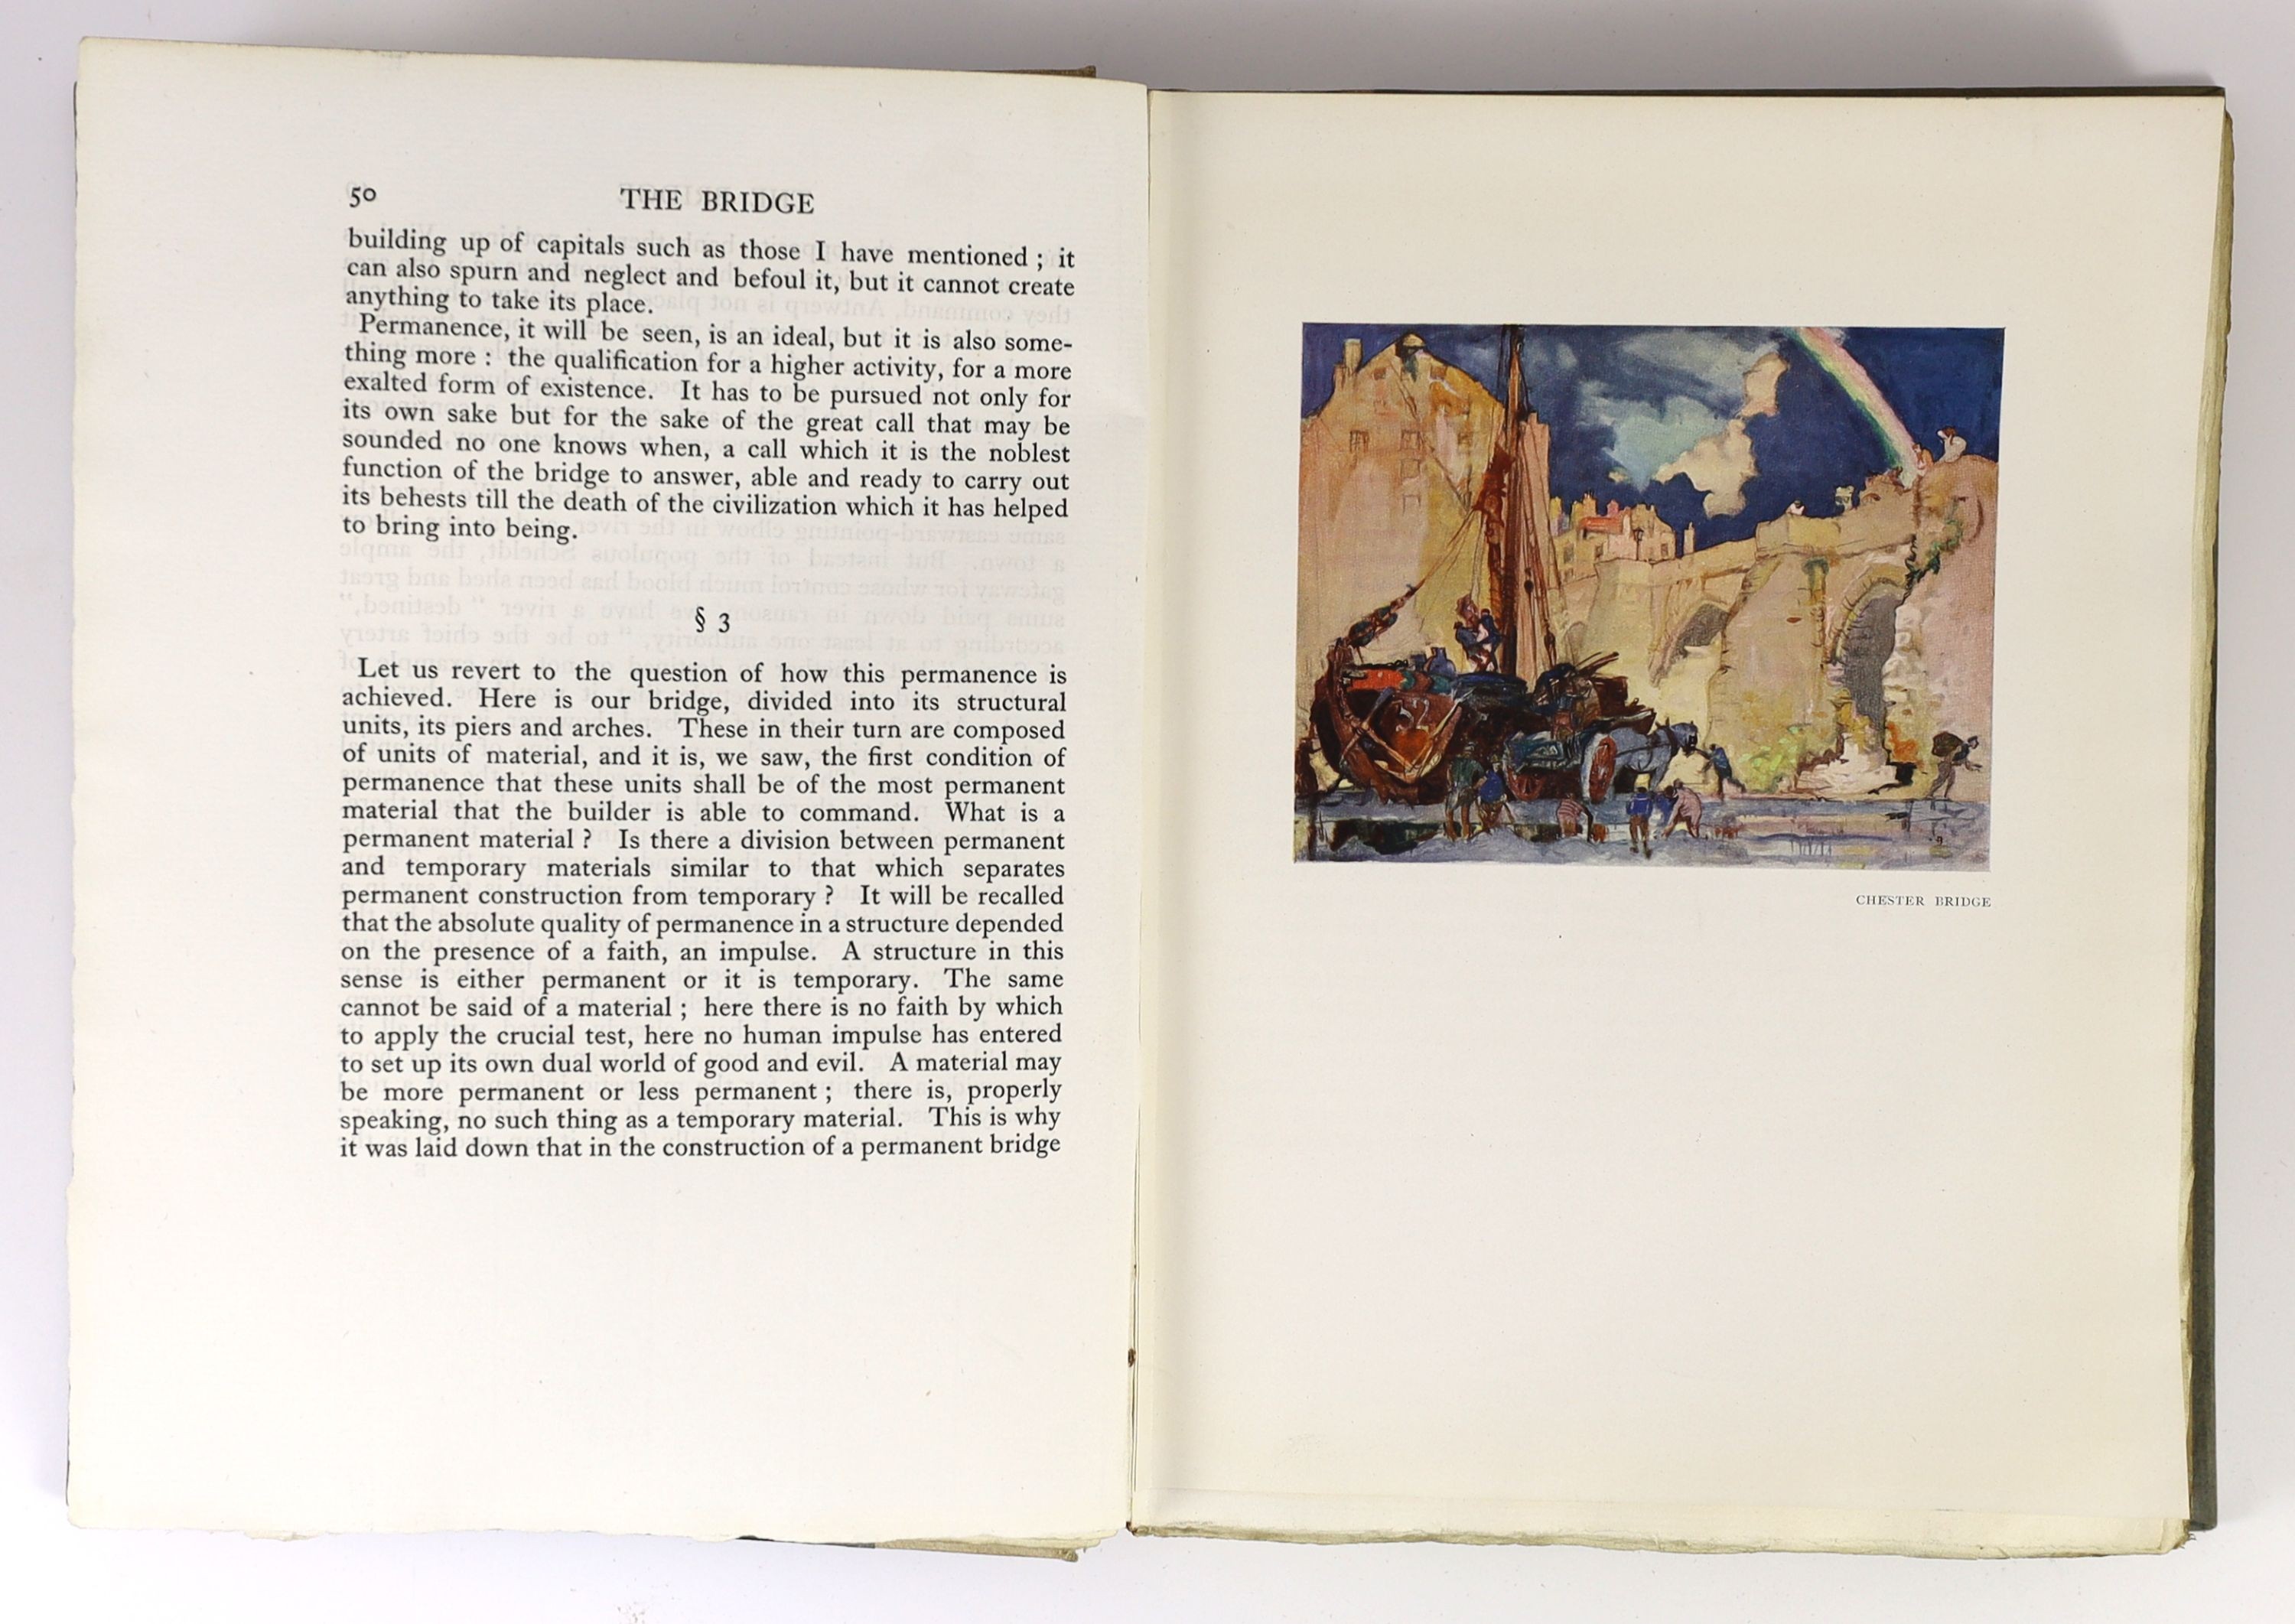 Barman, Christian - The Bridge, one of 125, illustrated by Frank Brangwyn, 4to, half cloth, with 26 colour plates, John Lane, Bodley Head, London and Dodd, Mead & Co., New York, 1926